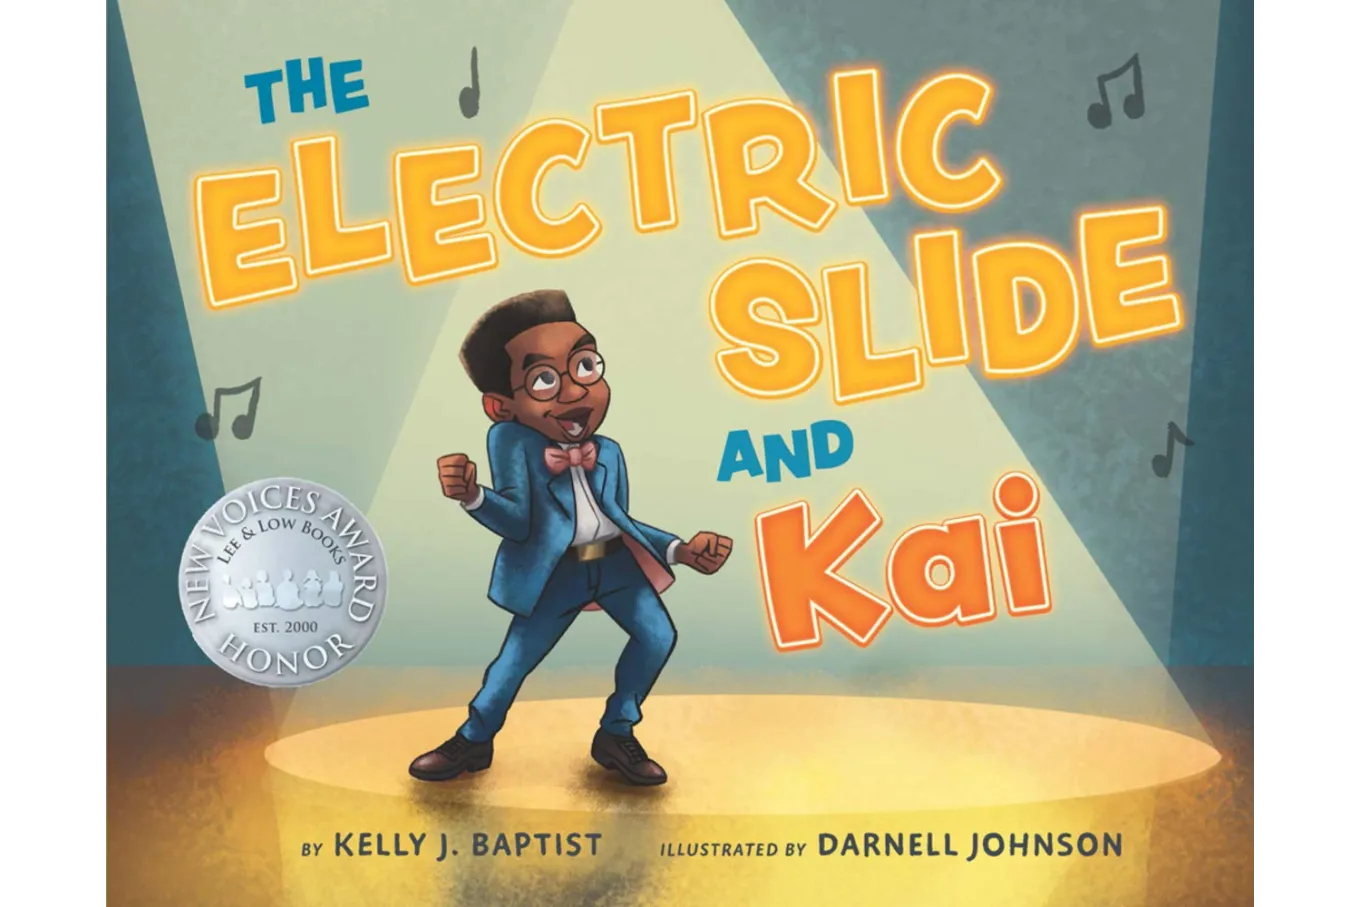 The Electric Slide and Kai Book Cover